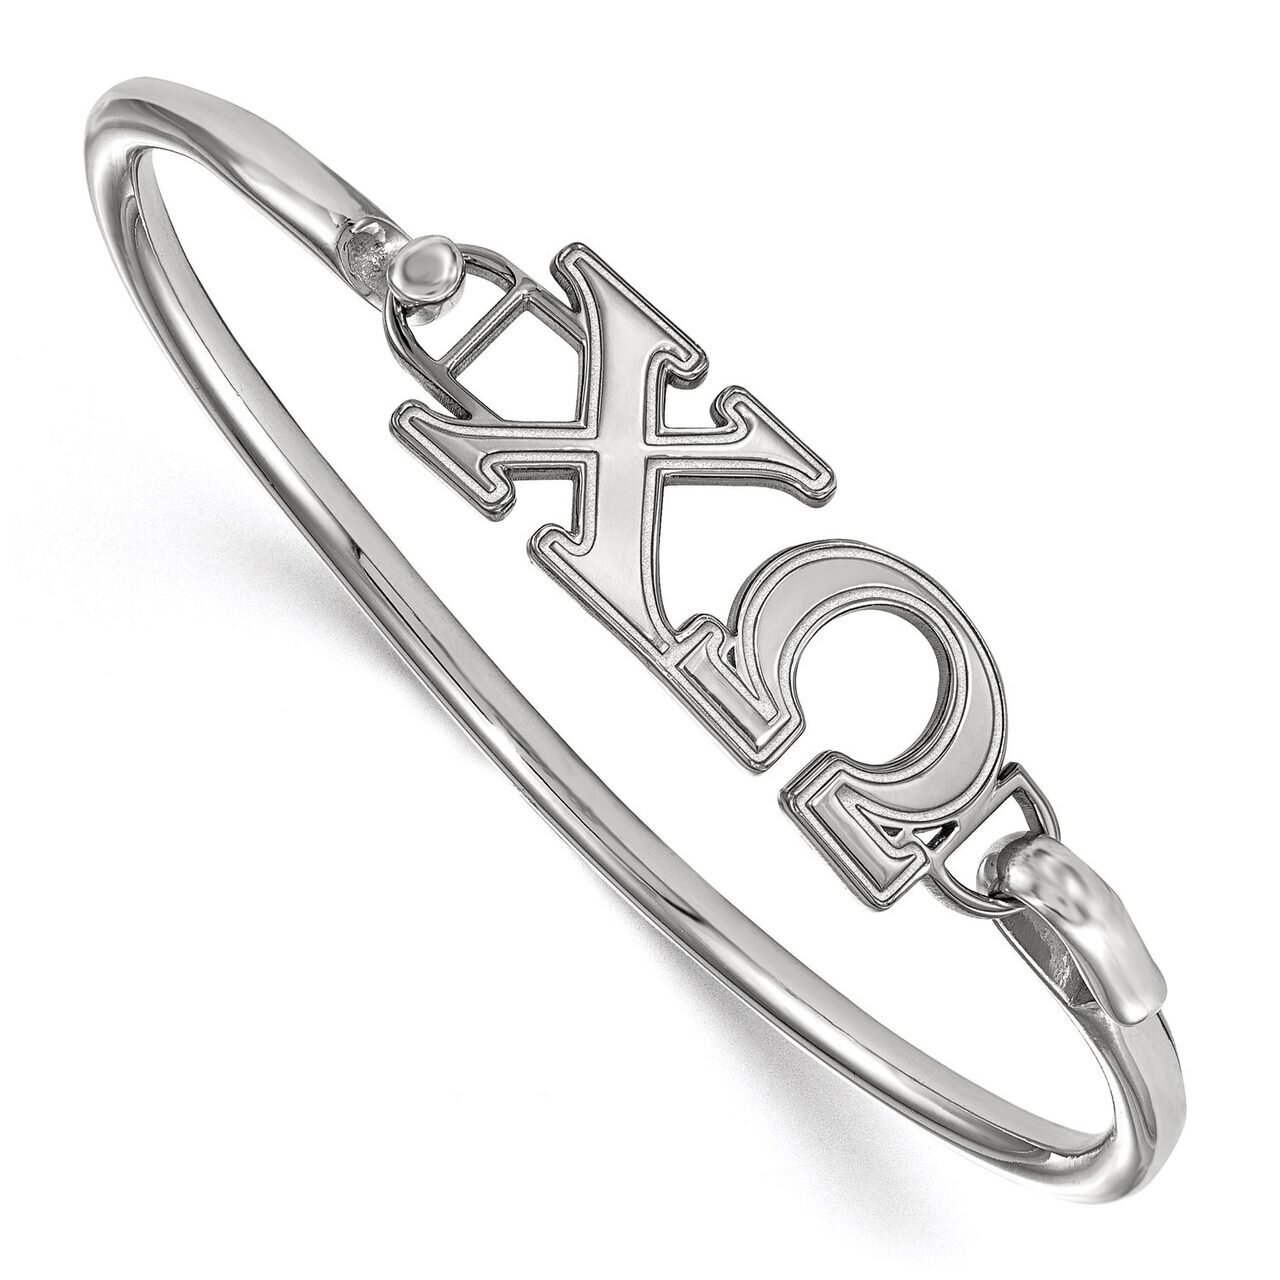 Chi Omega Small Hook and Clasp Bangle Sterling Silver SS009CHO-7